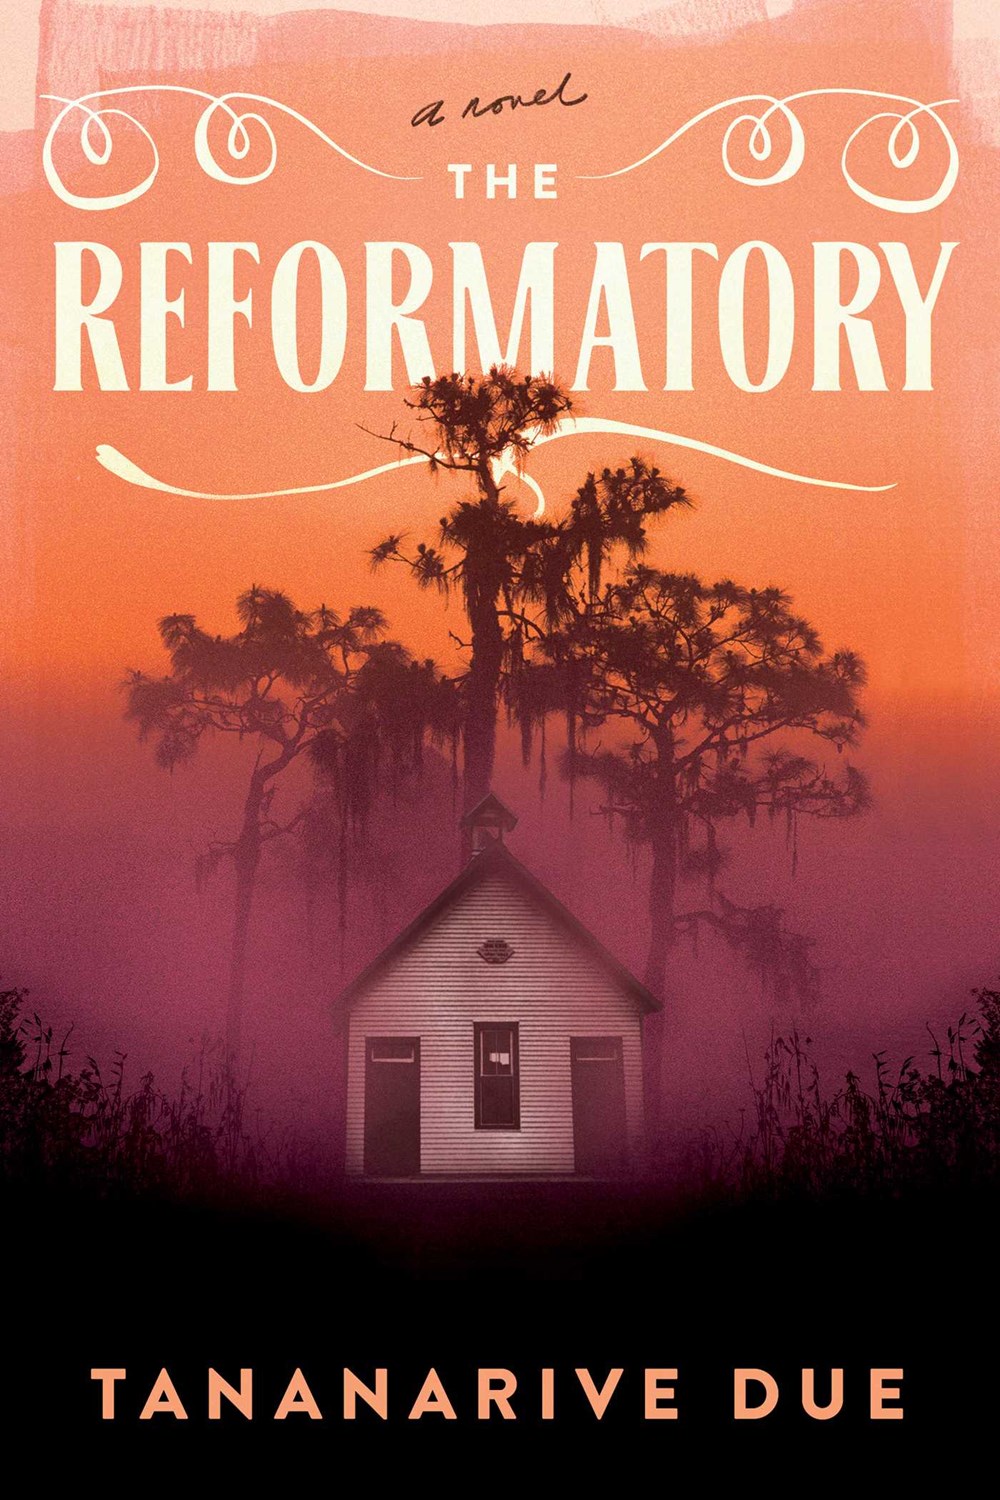 Tananarive Due’s ‘The Reformatory’ Wins Top Stoker Prize | Book Pulse